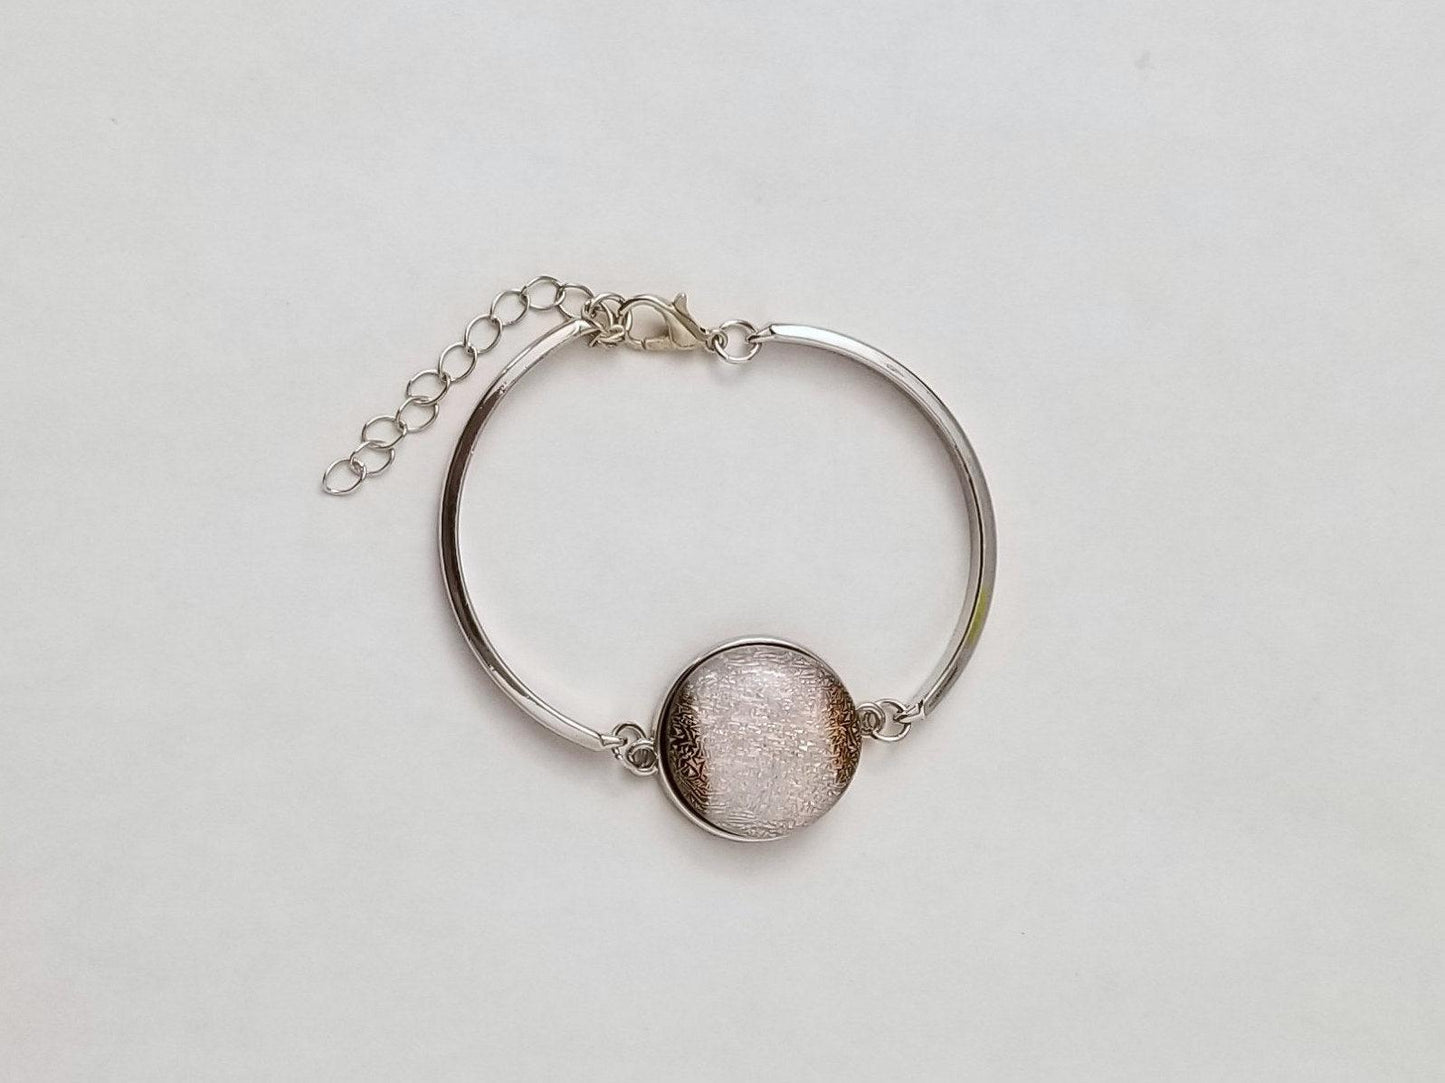 Delicate Adjustable Bracelet, silver tone with Orange and White  Dichroic fused glass cabochon